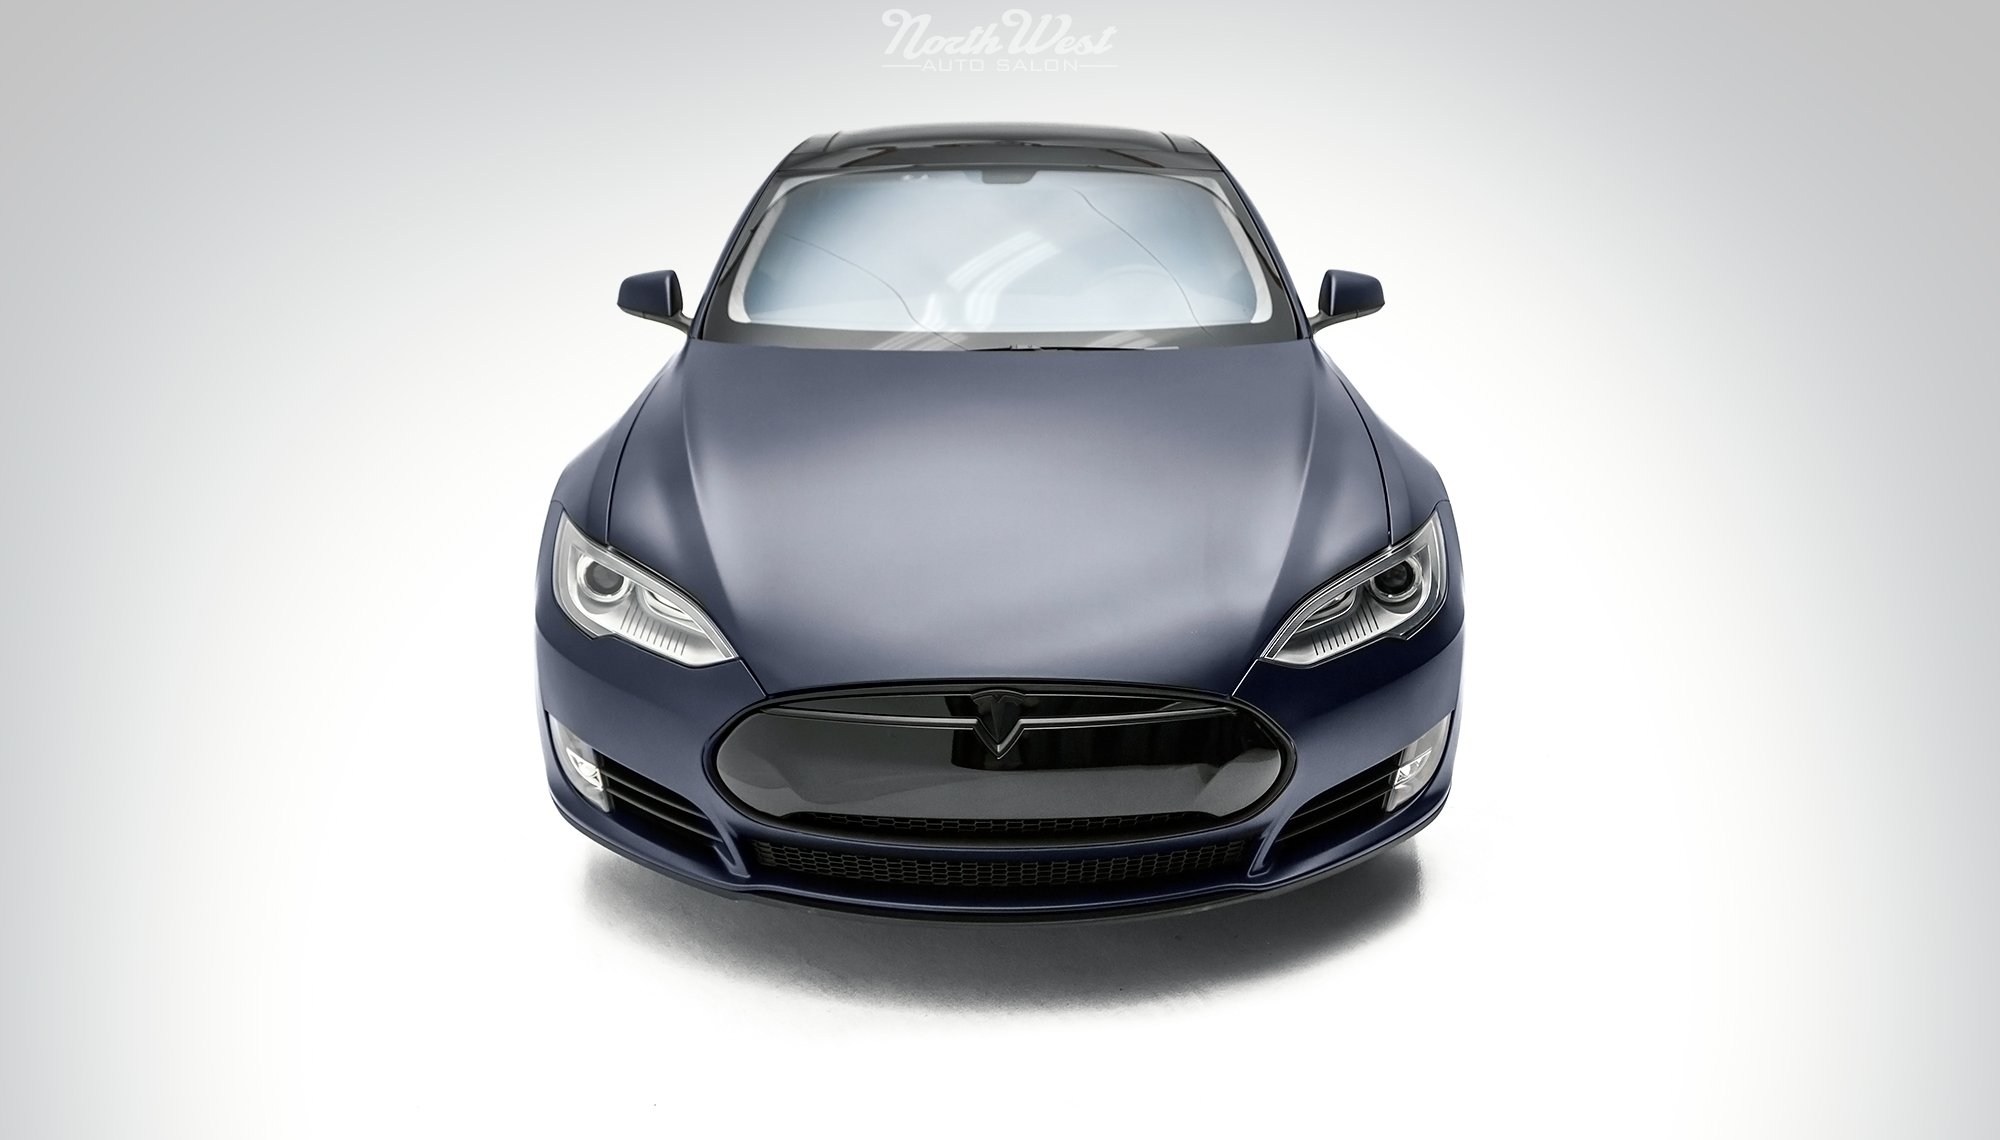 tesla-model-s-signature-wrapped-satin-xpel-stealth-paint-protection-clear-bra-northwest-auto-sal.jpg